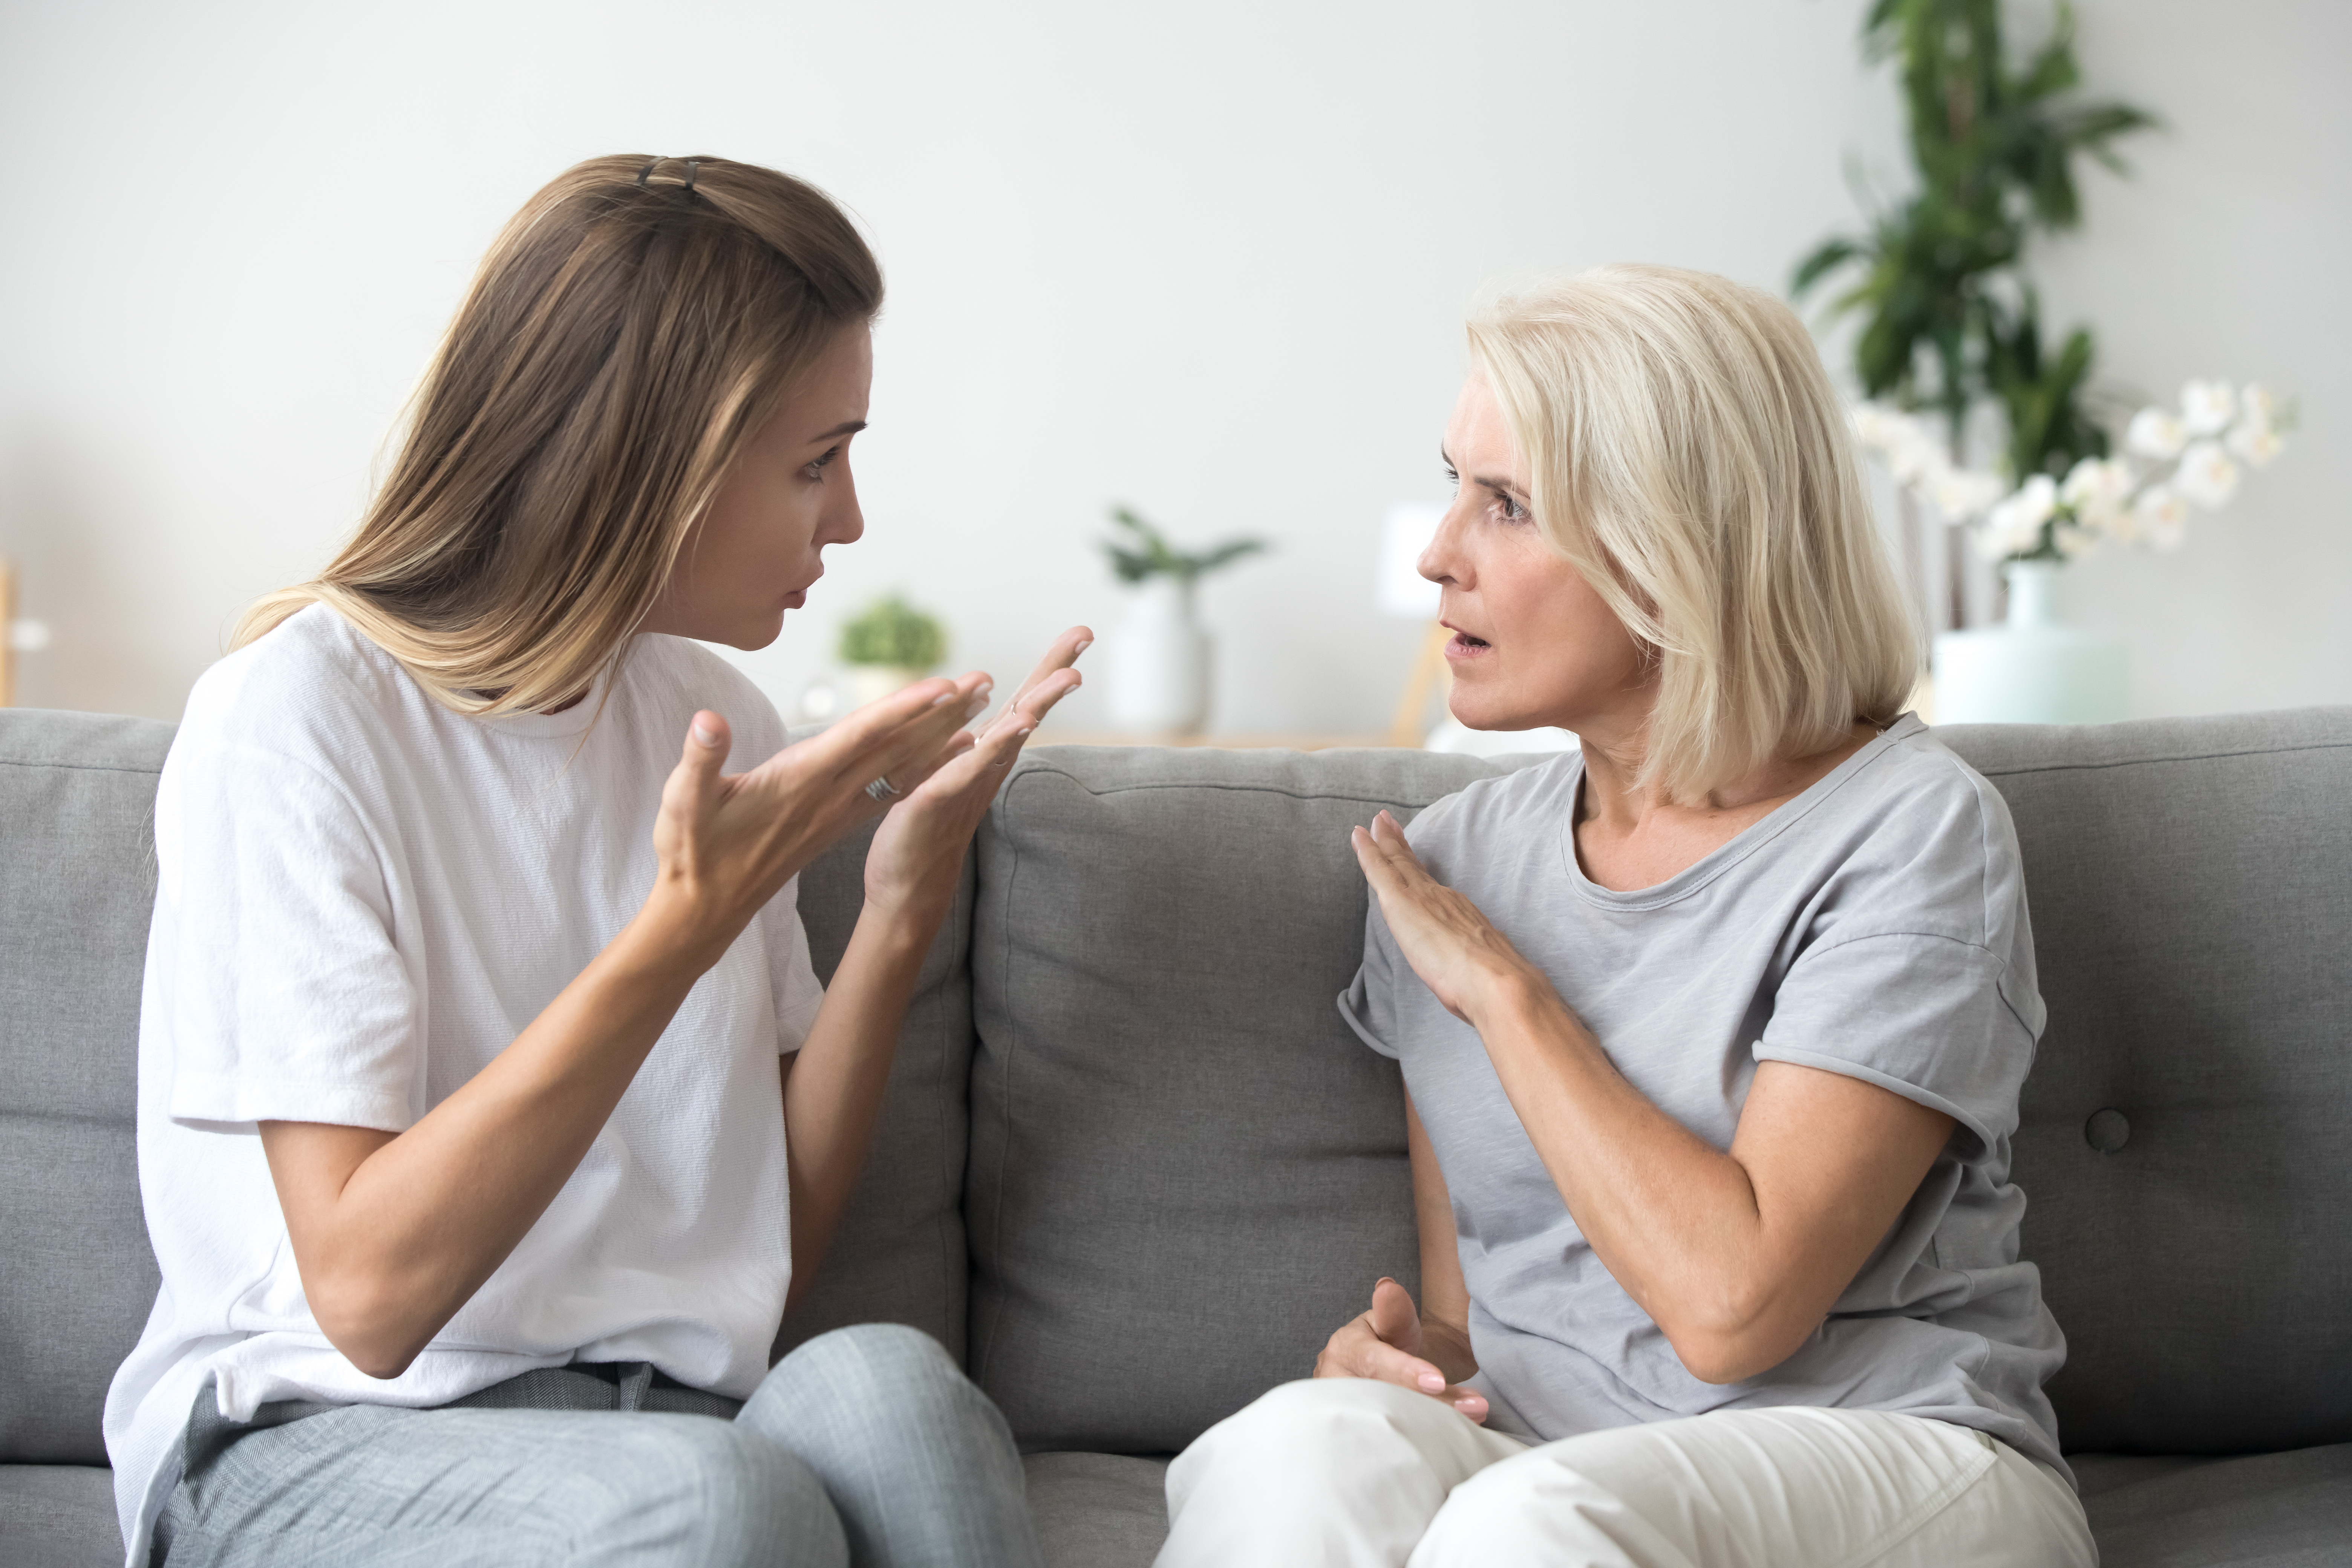 Two women having a discussion | Source: Shutterstock